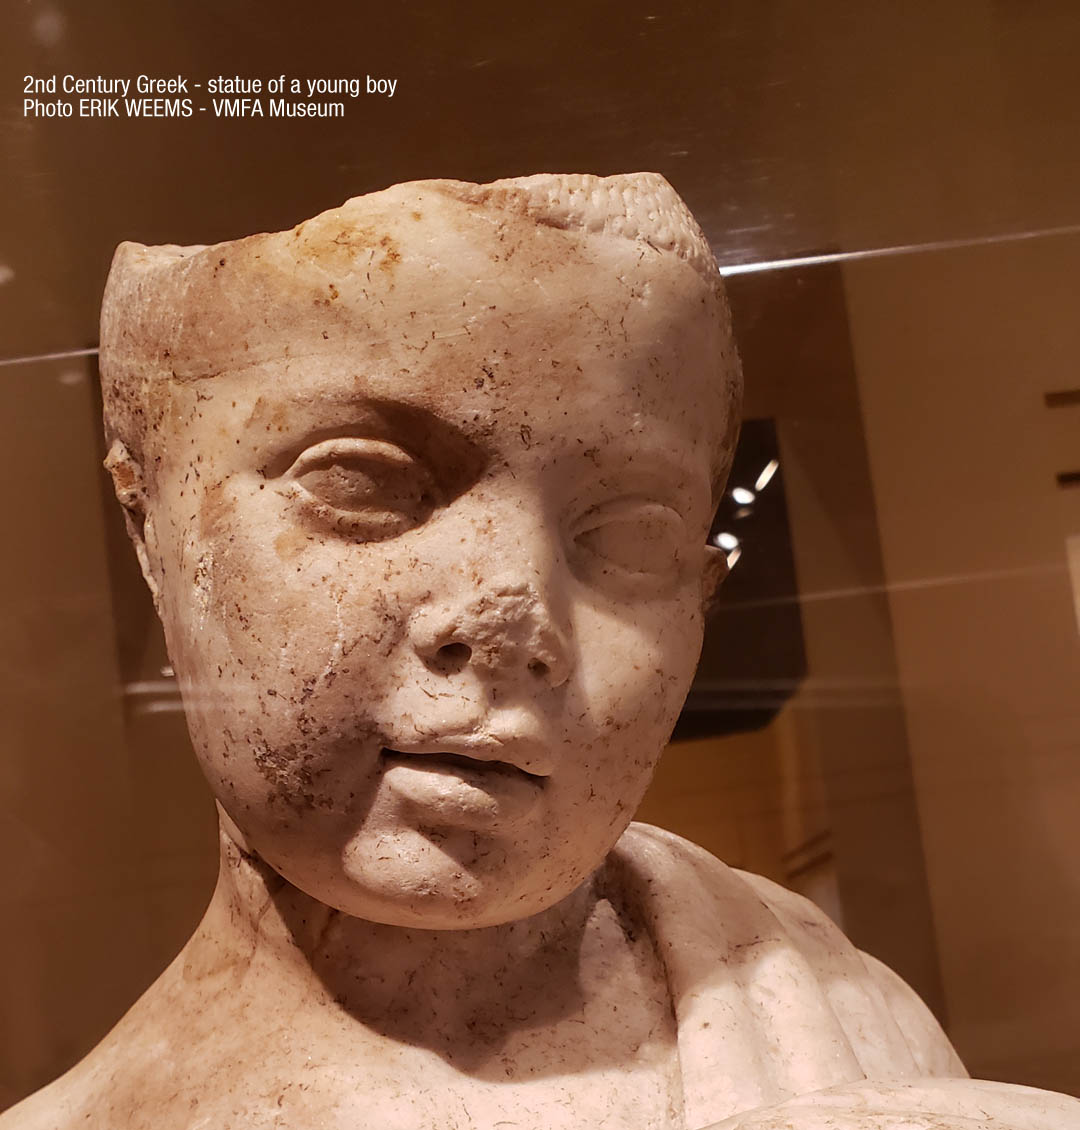 Detail of face of Young Greek Boy 2nd Century Sculpture